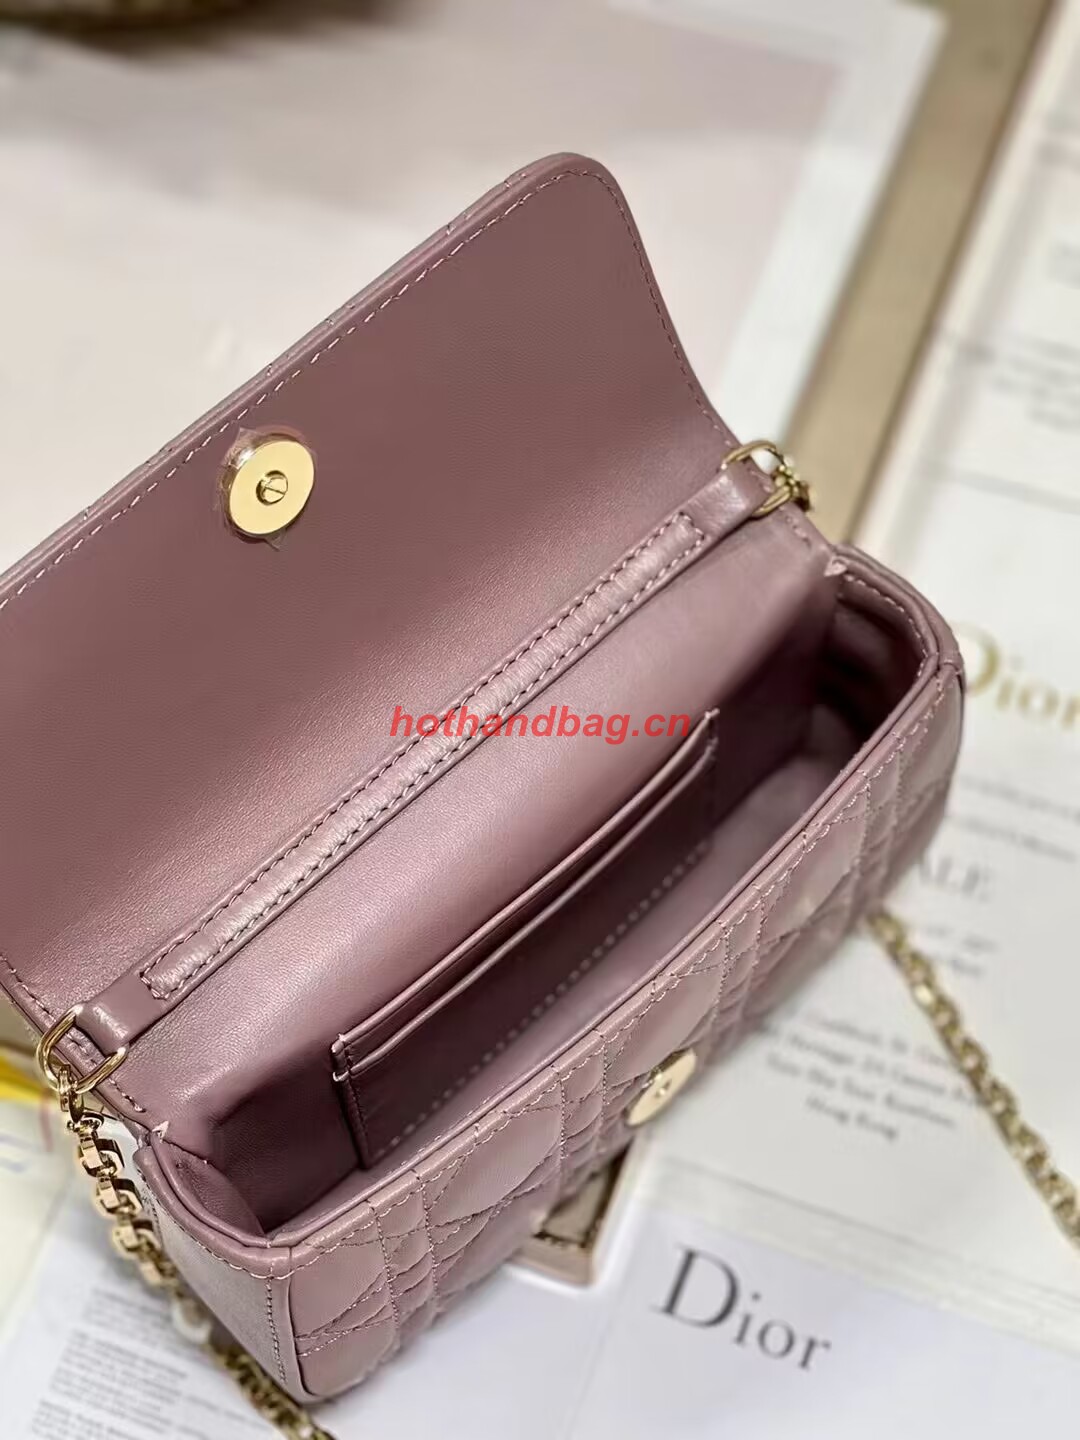 LADY DIOR PHONE POUCH Aesthetic Cannage Lambskin S0977OE pink